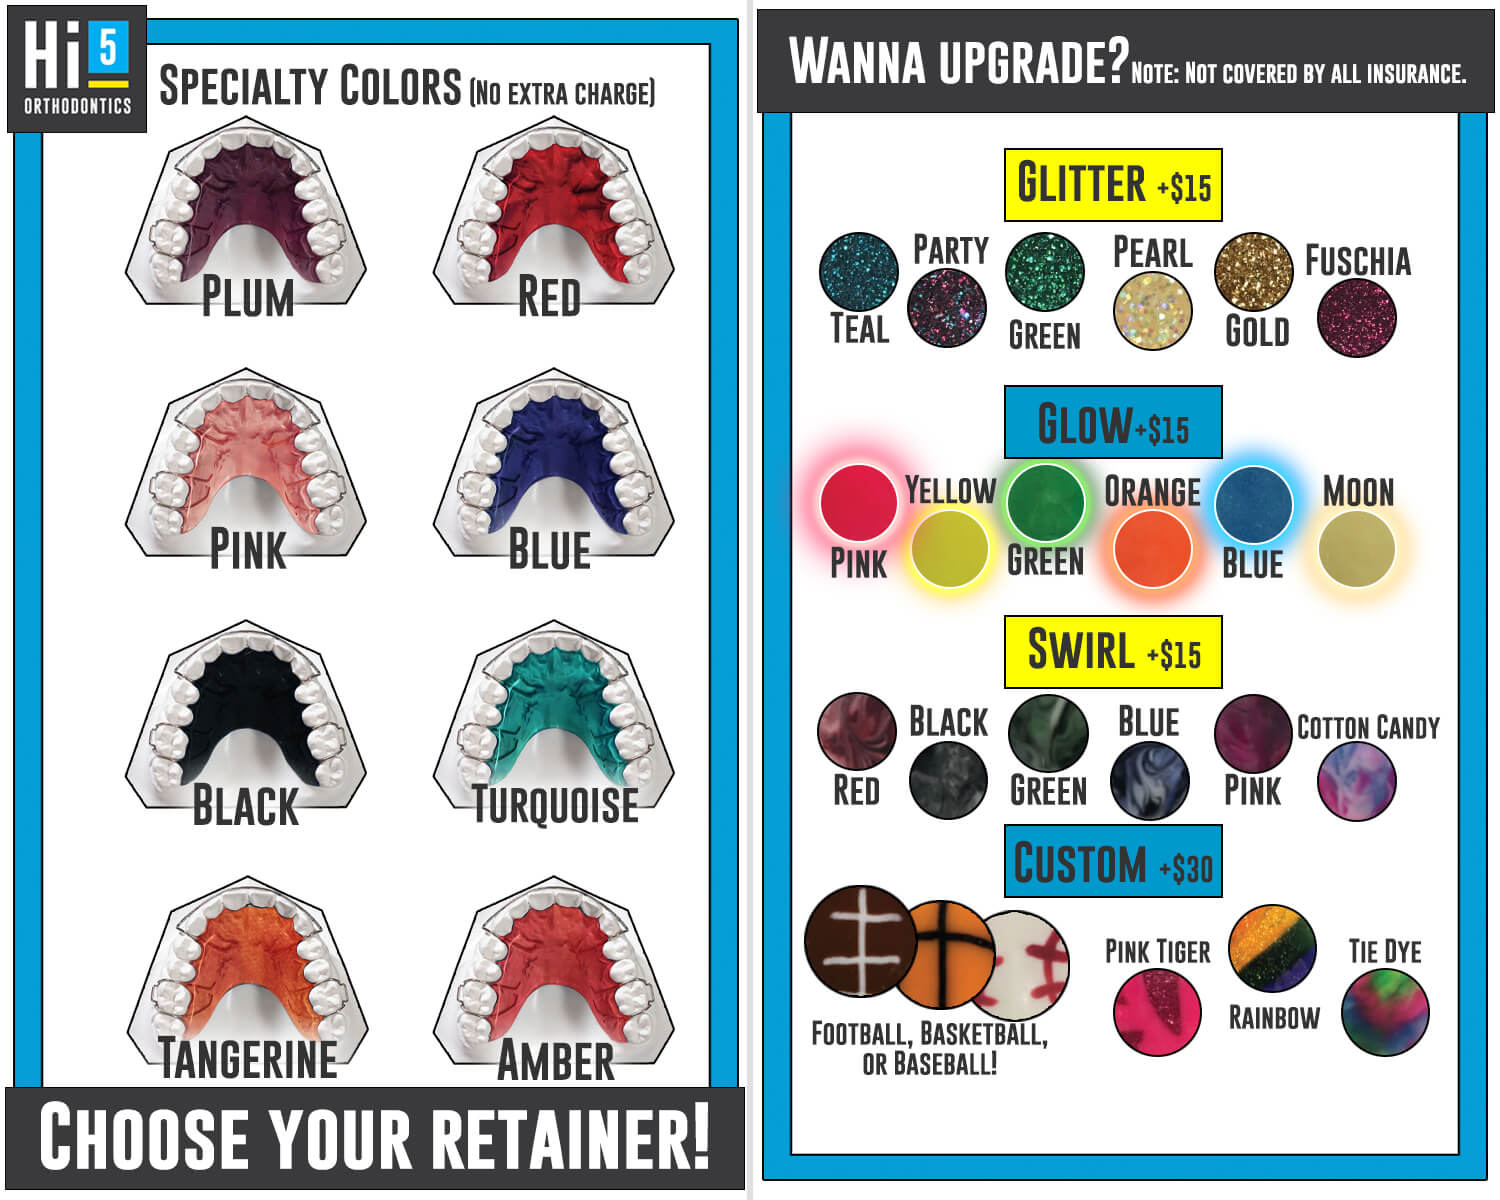 Specialty Retainers in different colors from Hi 5 Ortho